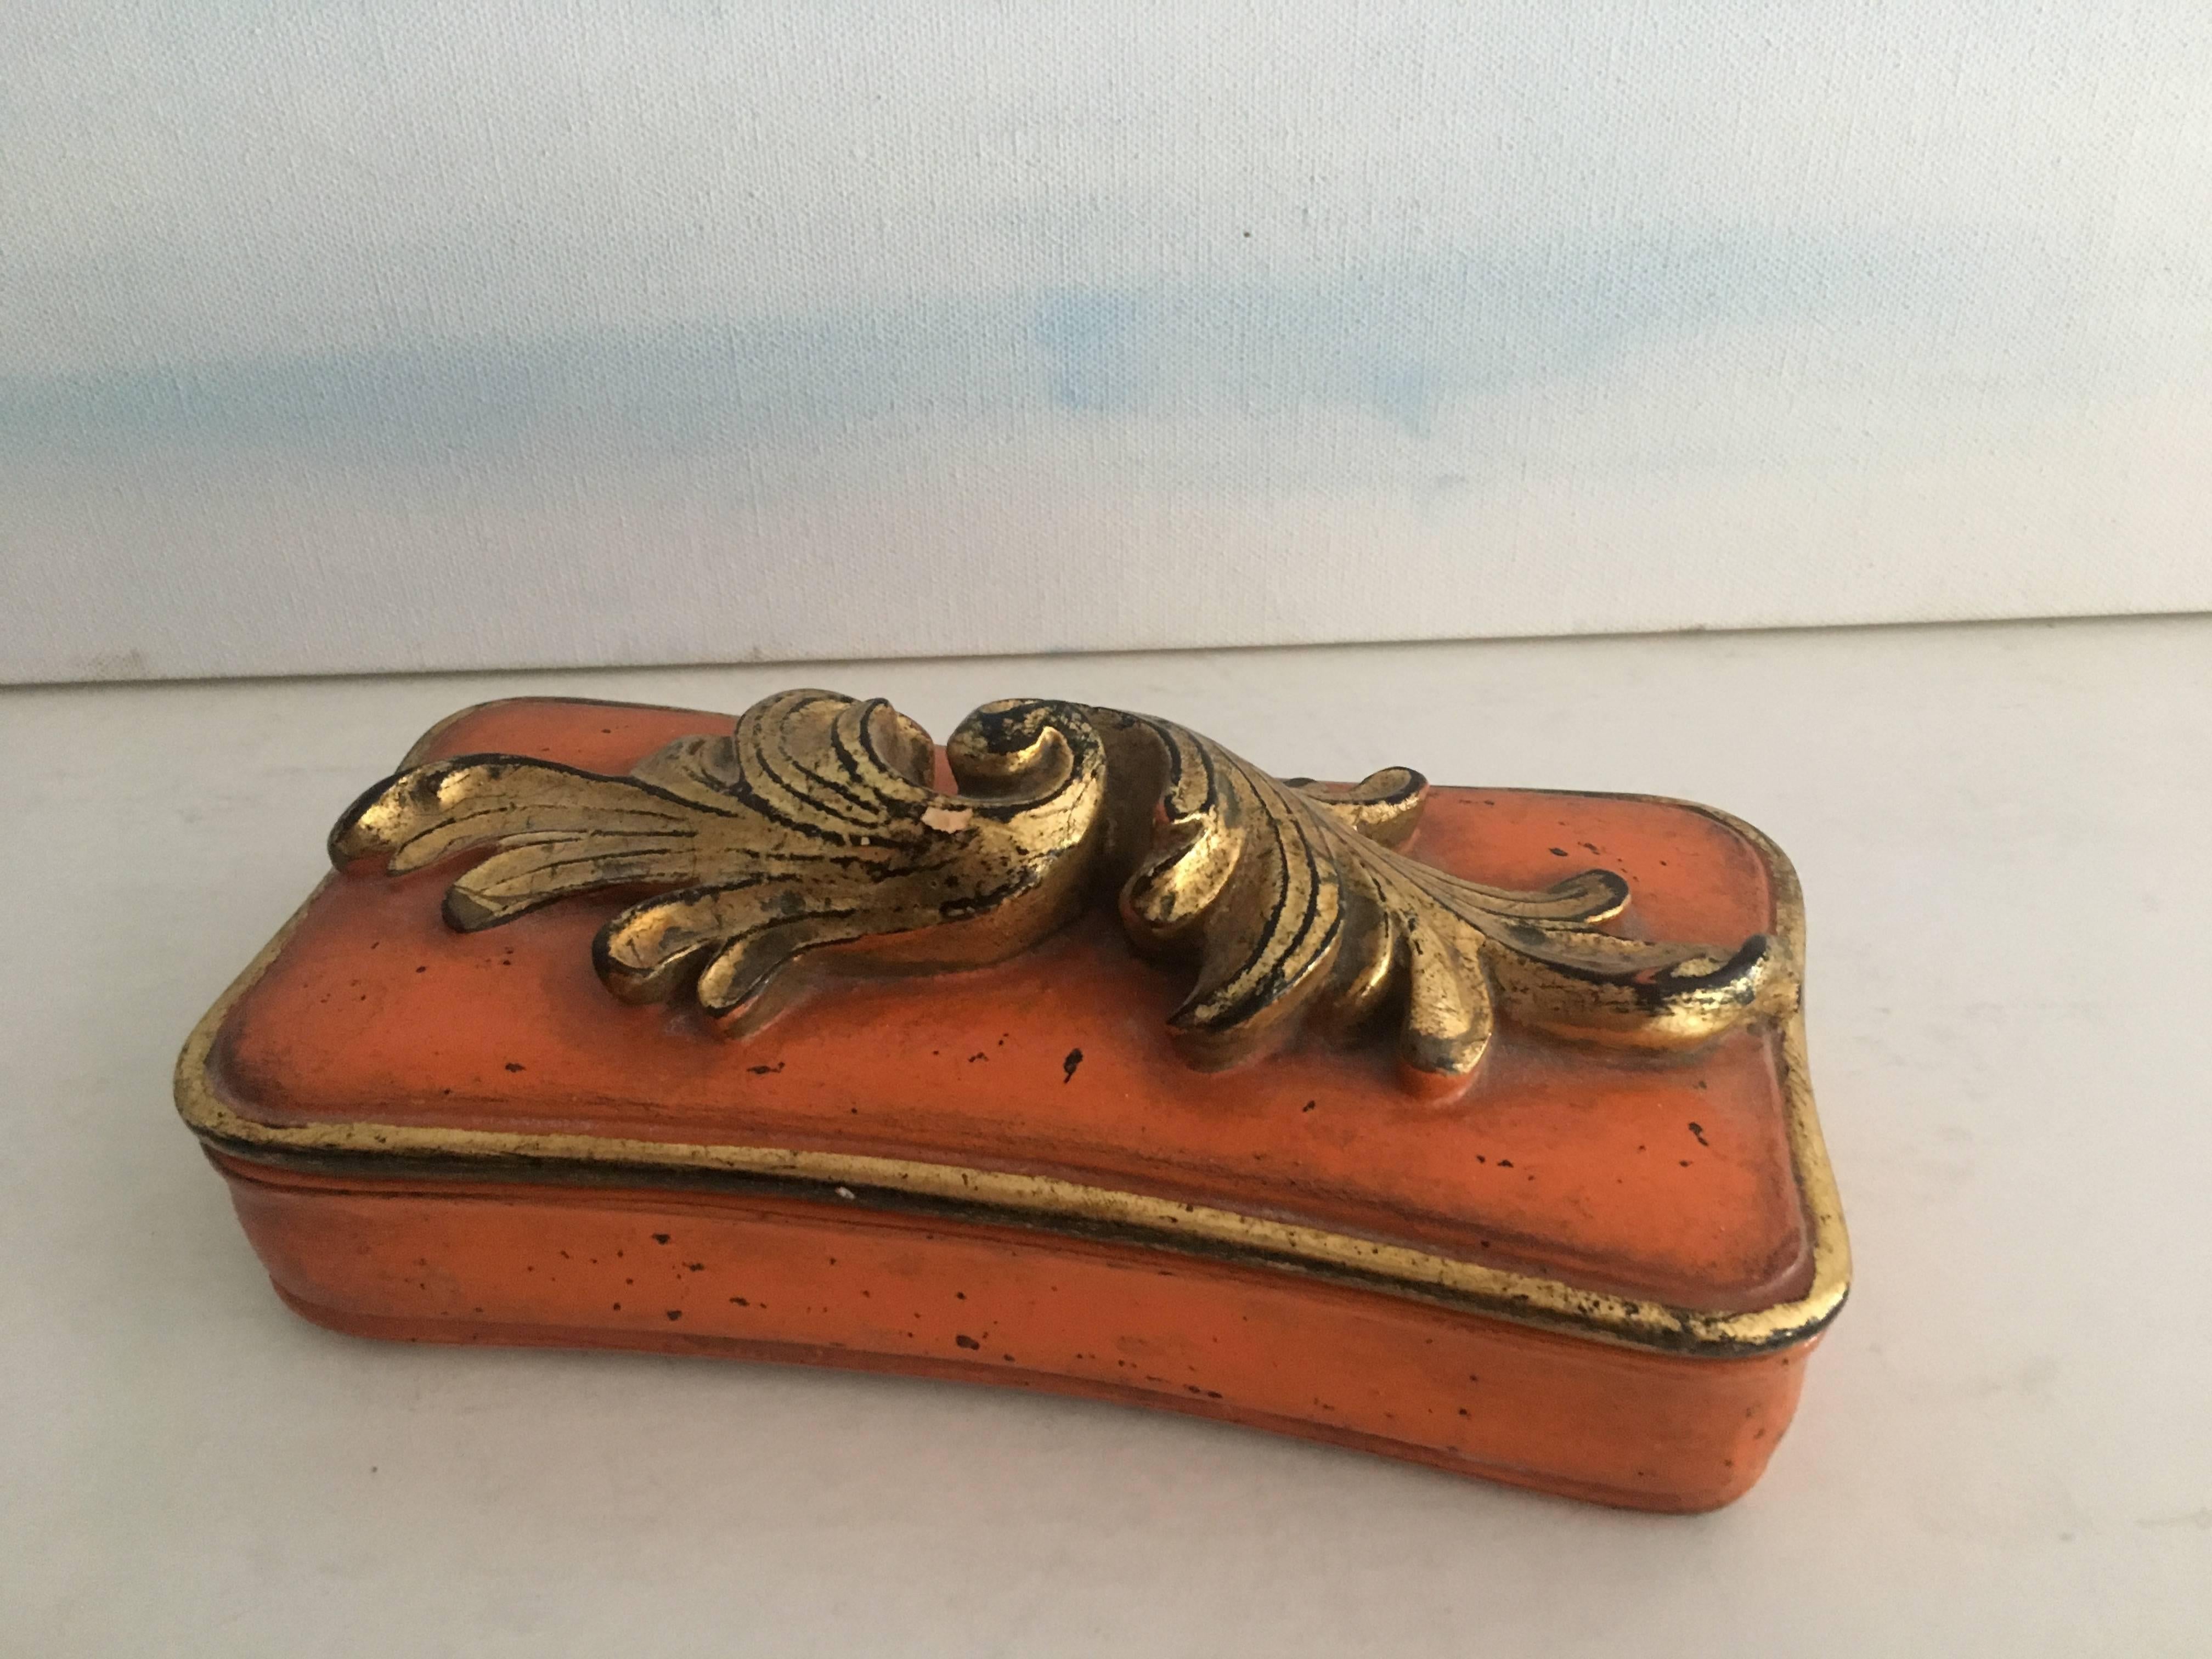 Stunning Borghese ceramic jewel box for the vanity or dressing table. Gilt trim and patinated Borghese Orange. A great gift for the perfect lady!